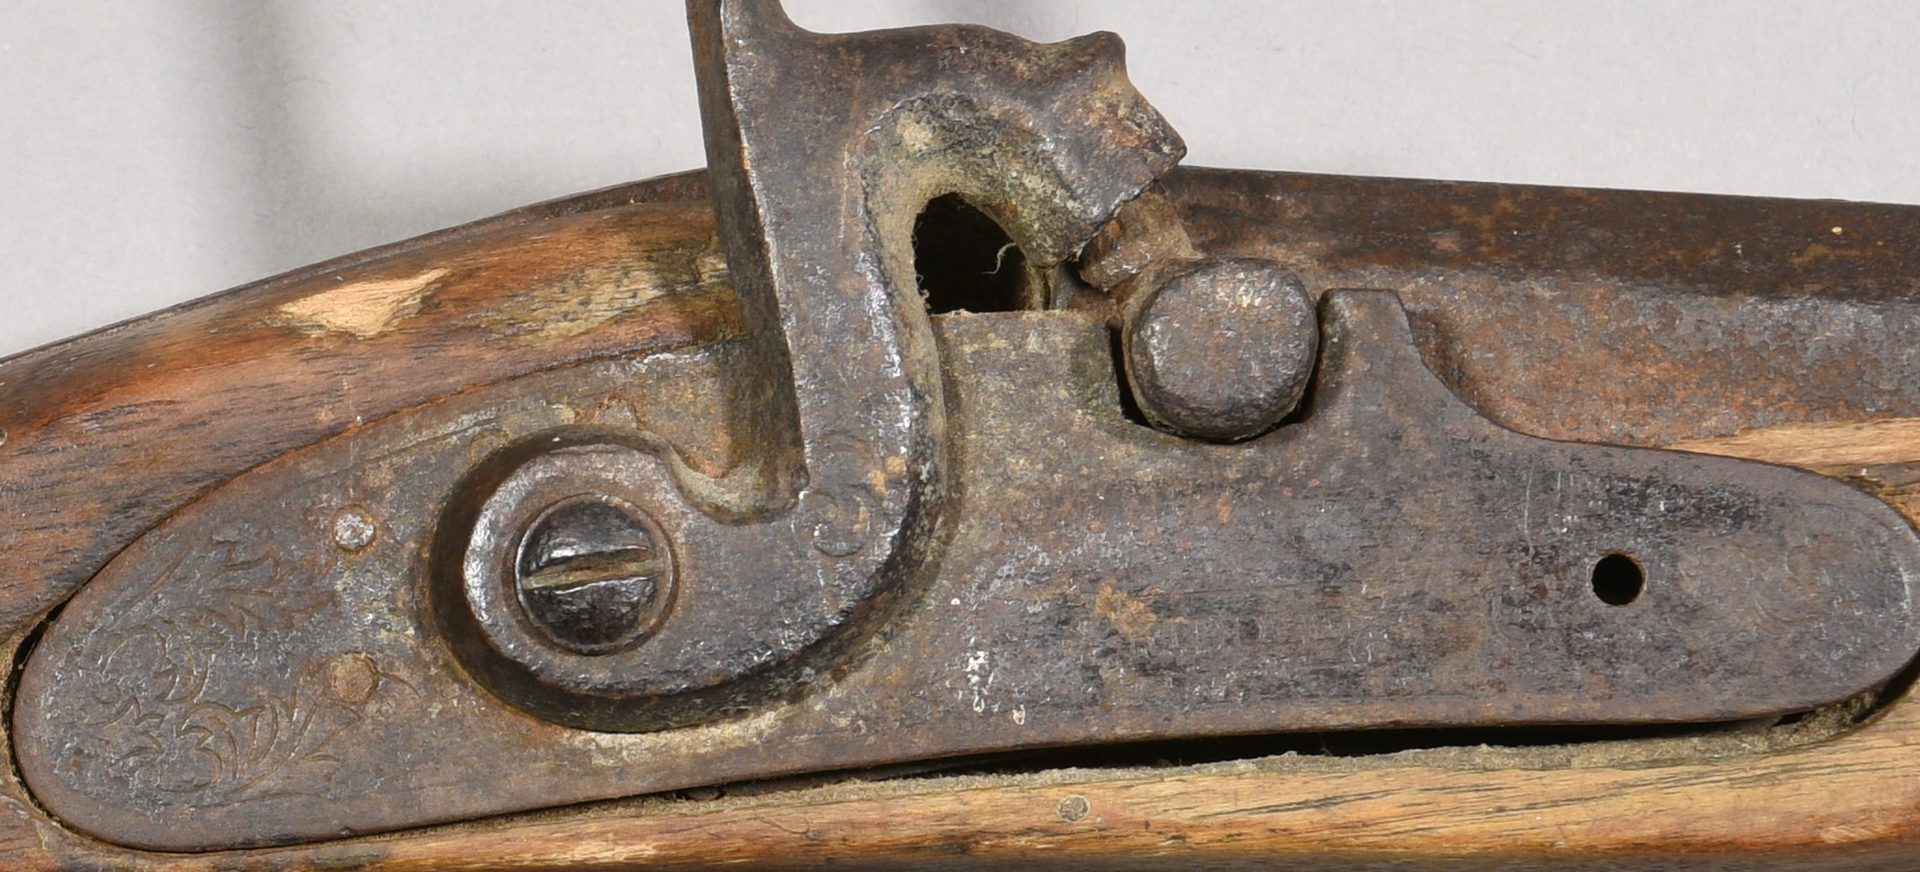 Lot 303: Kentucky Half Stock Rifle Marked Settle 1857 And Fowling Piece